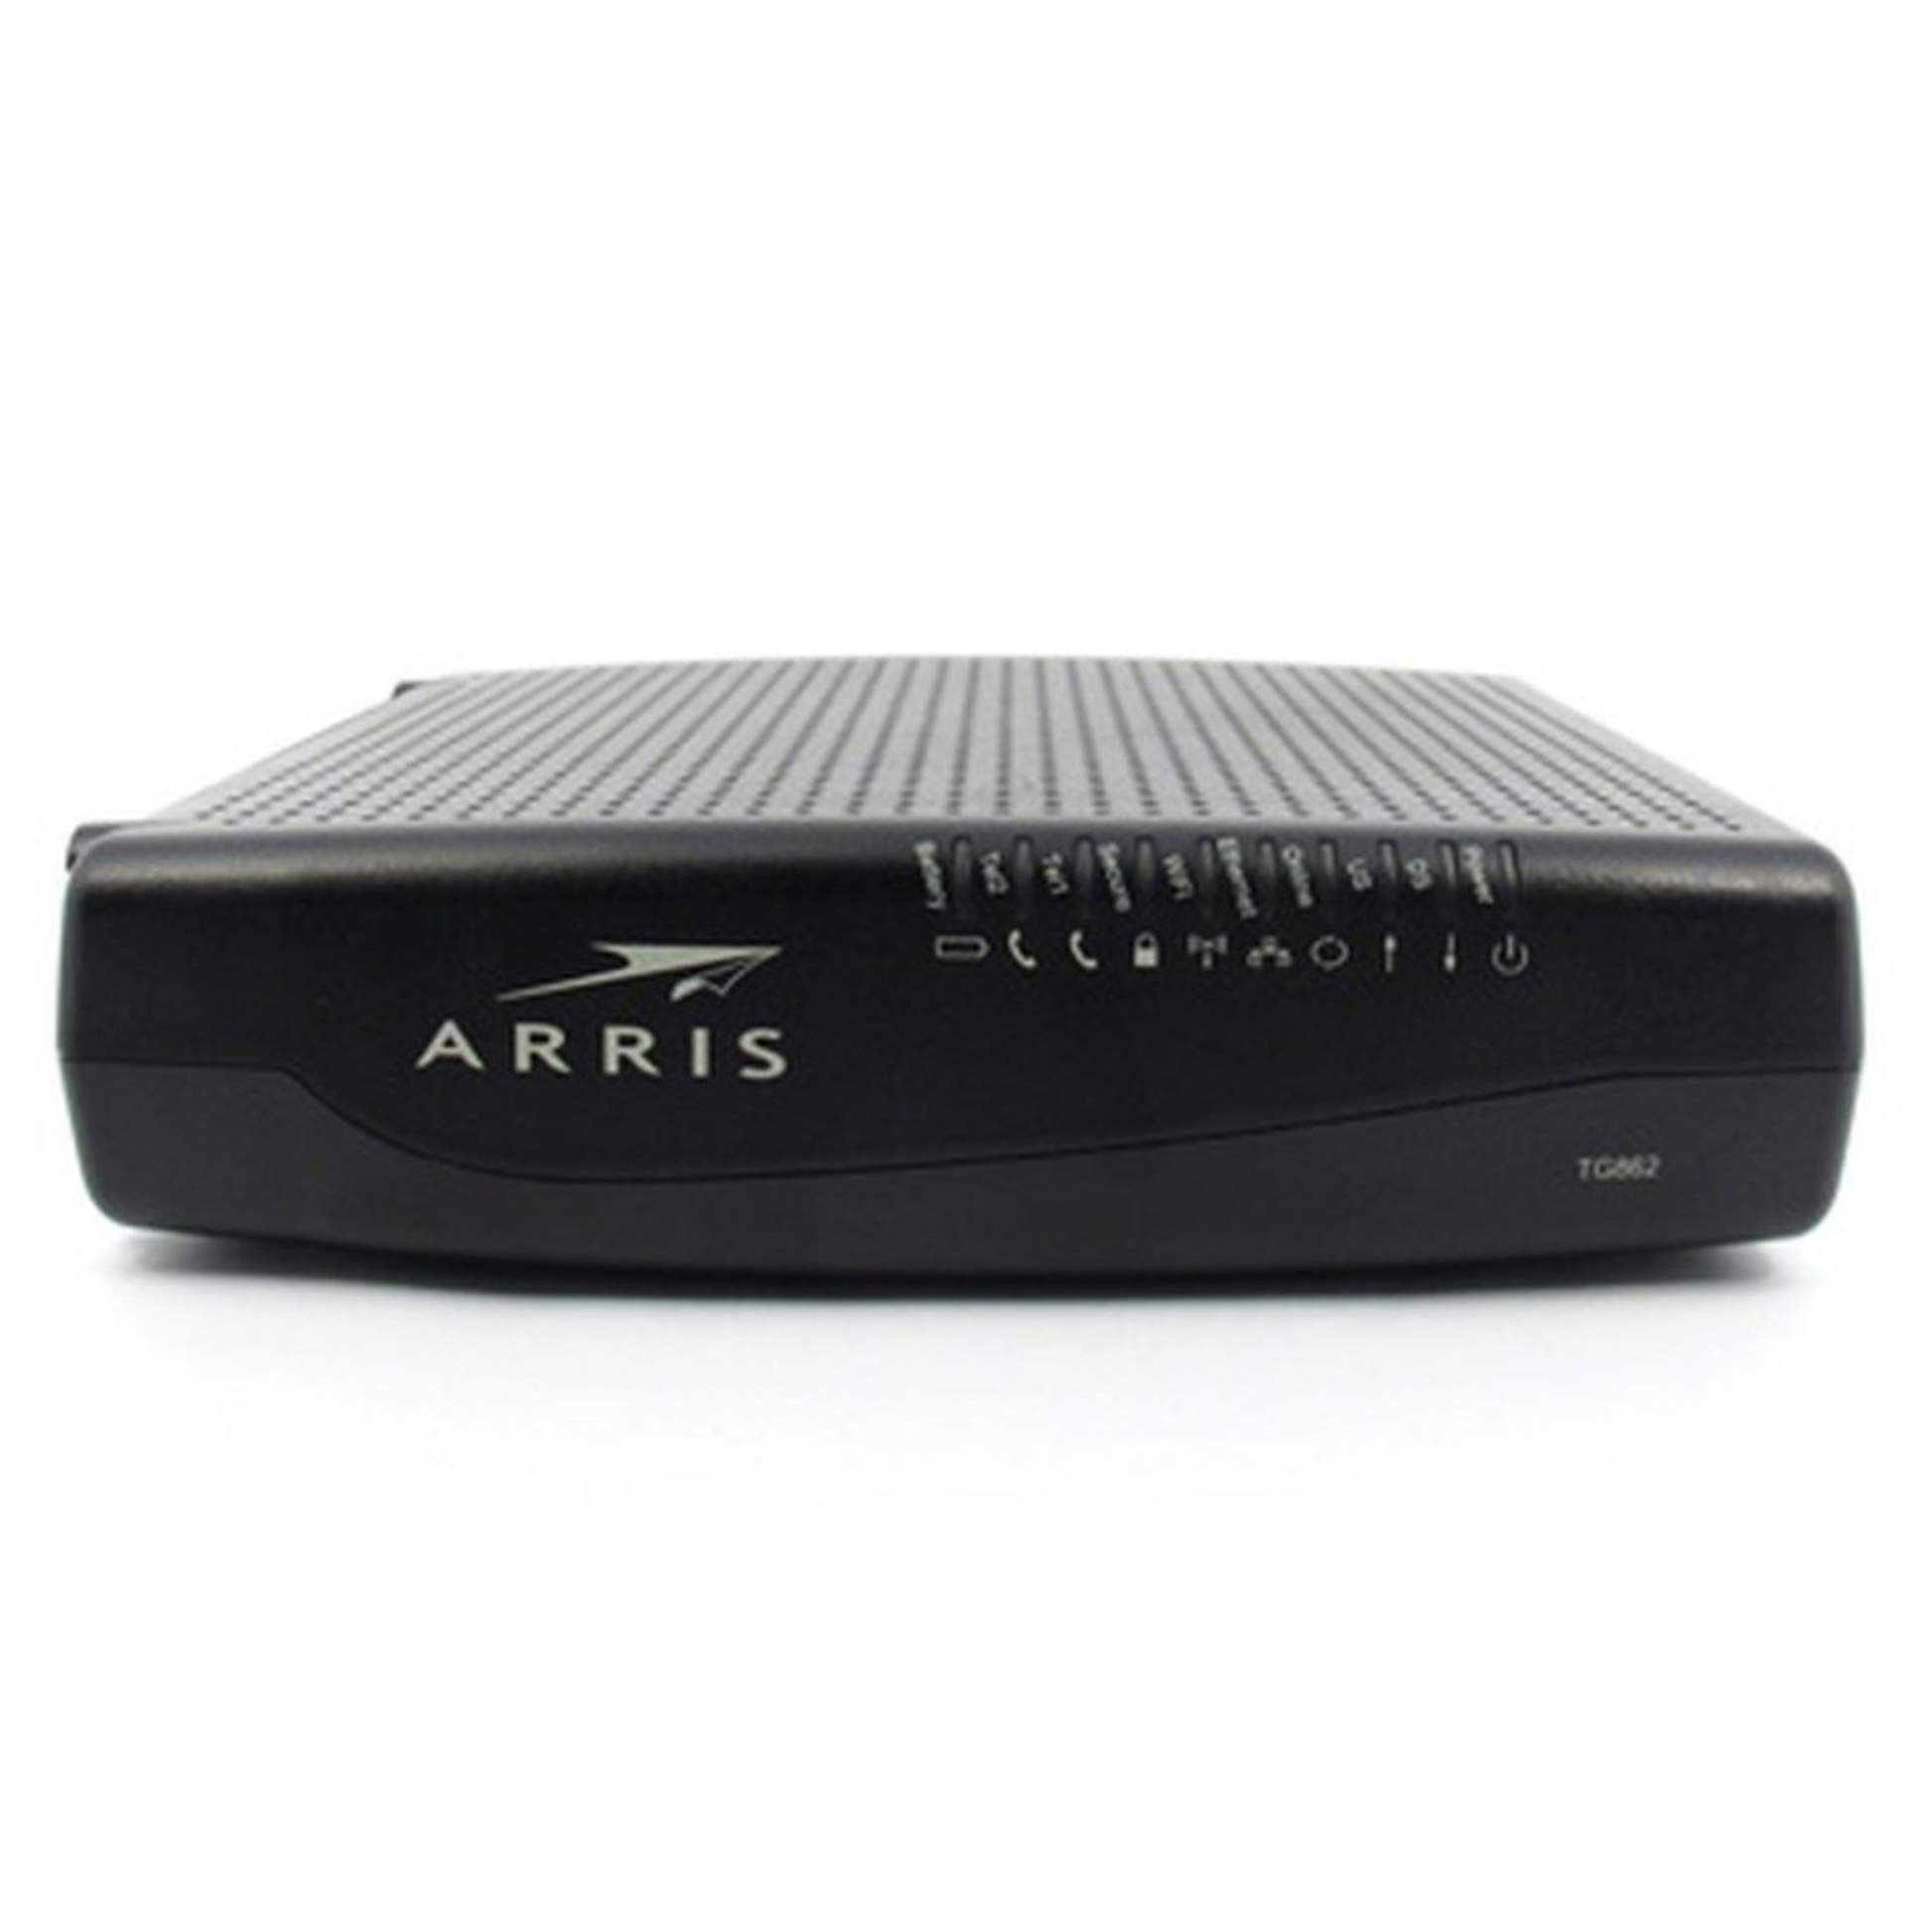 Arris Touchstone DOCSIS 3.0 Residential Gateway Wi-Fi 802.11n 4 Port Router, and 2 Voice Lines TG862G